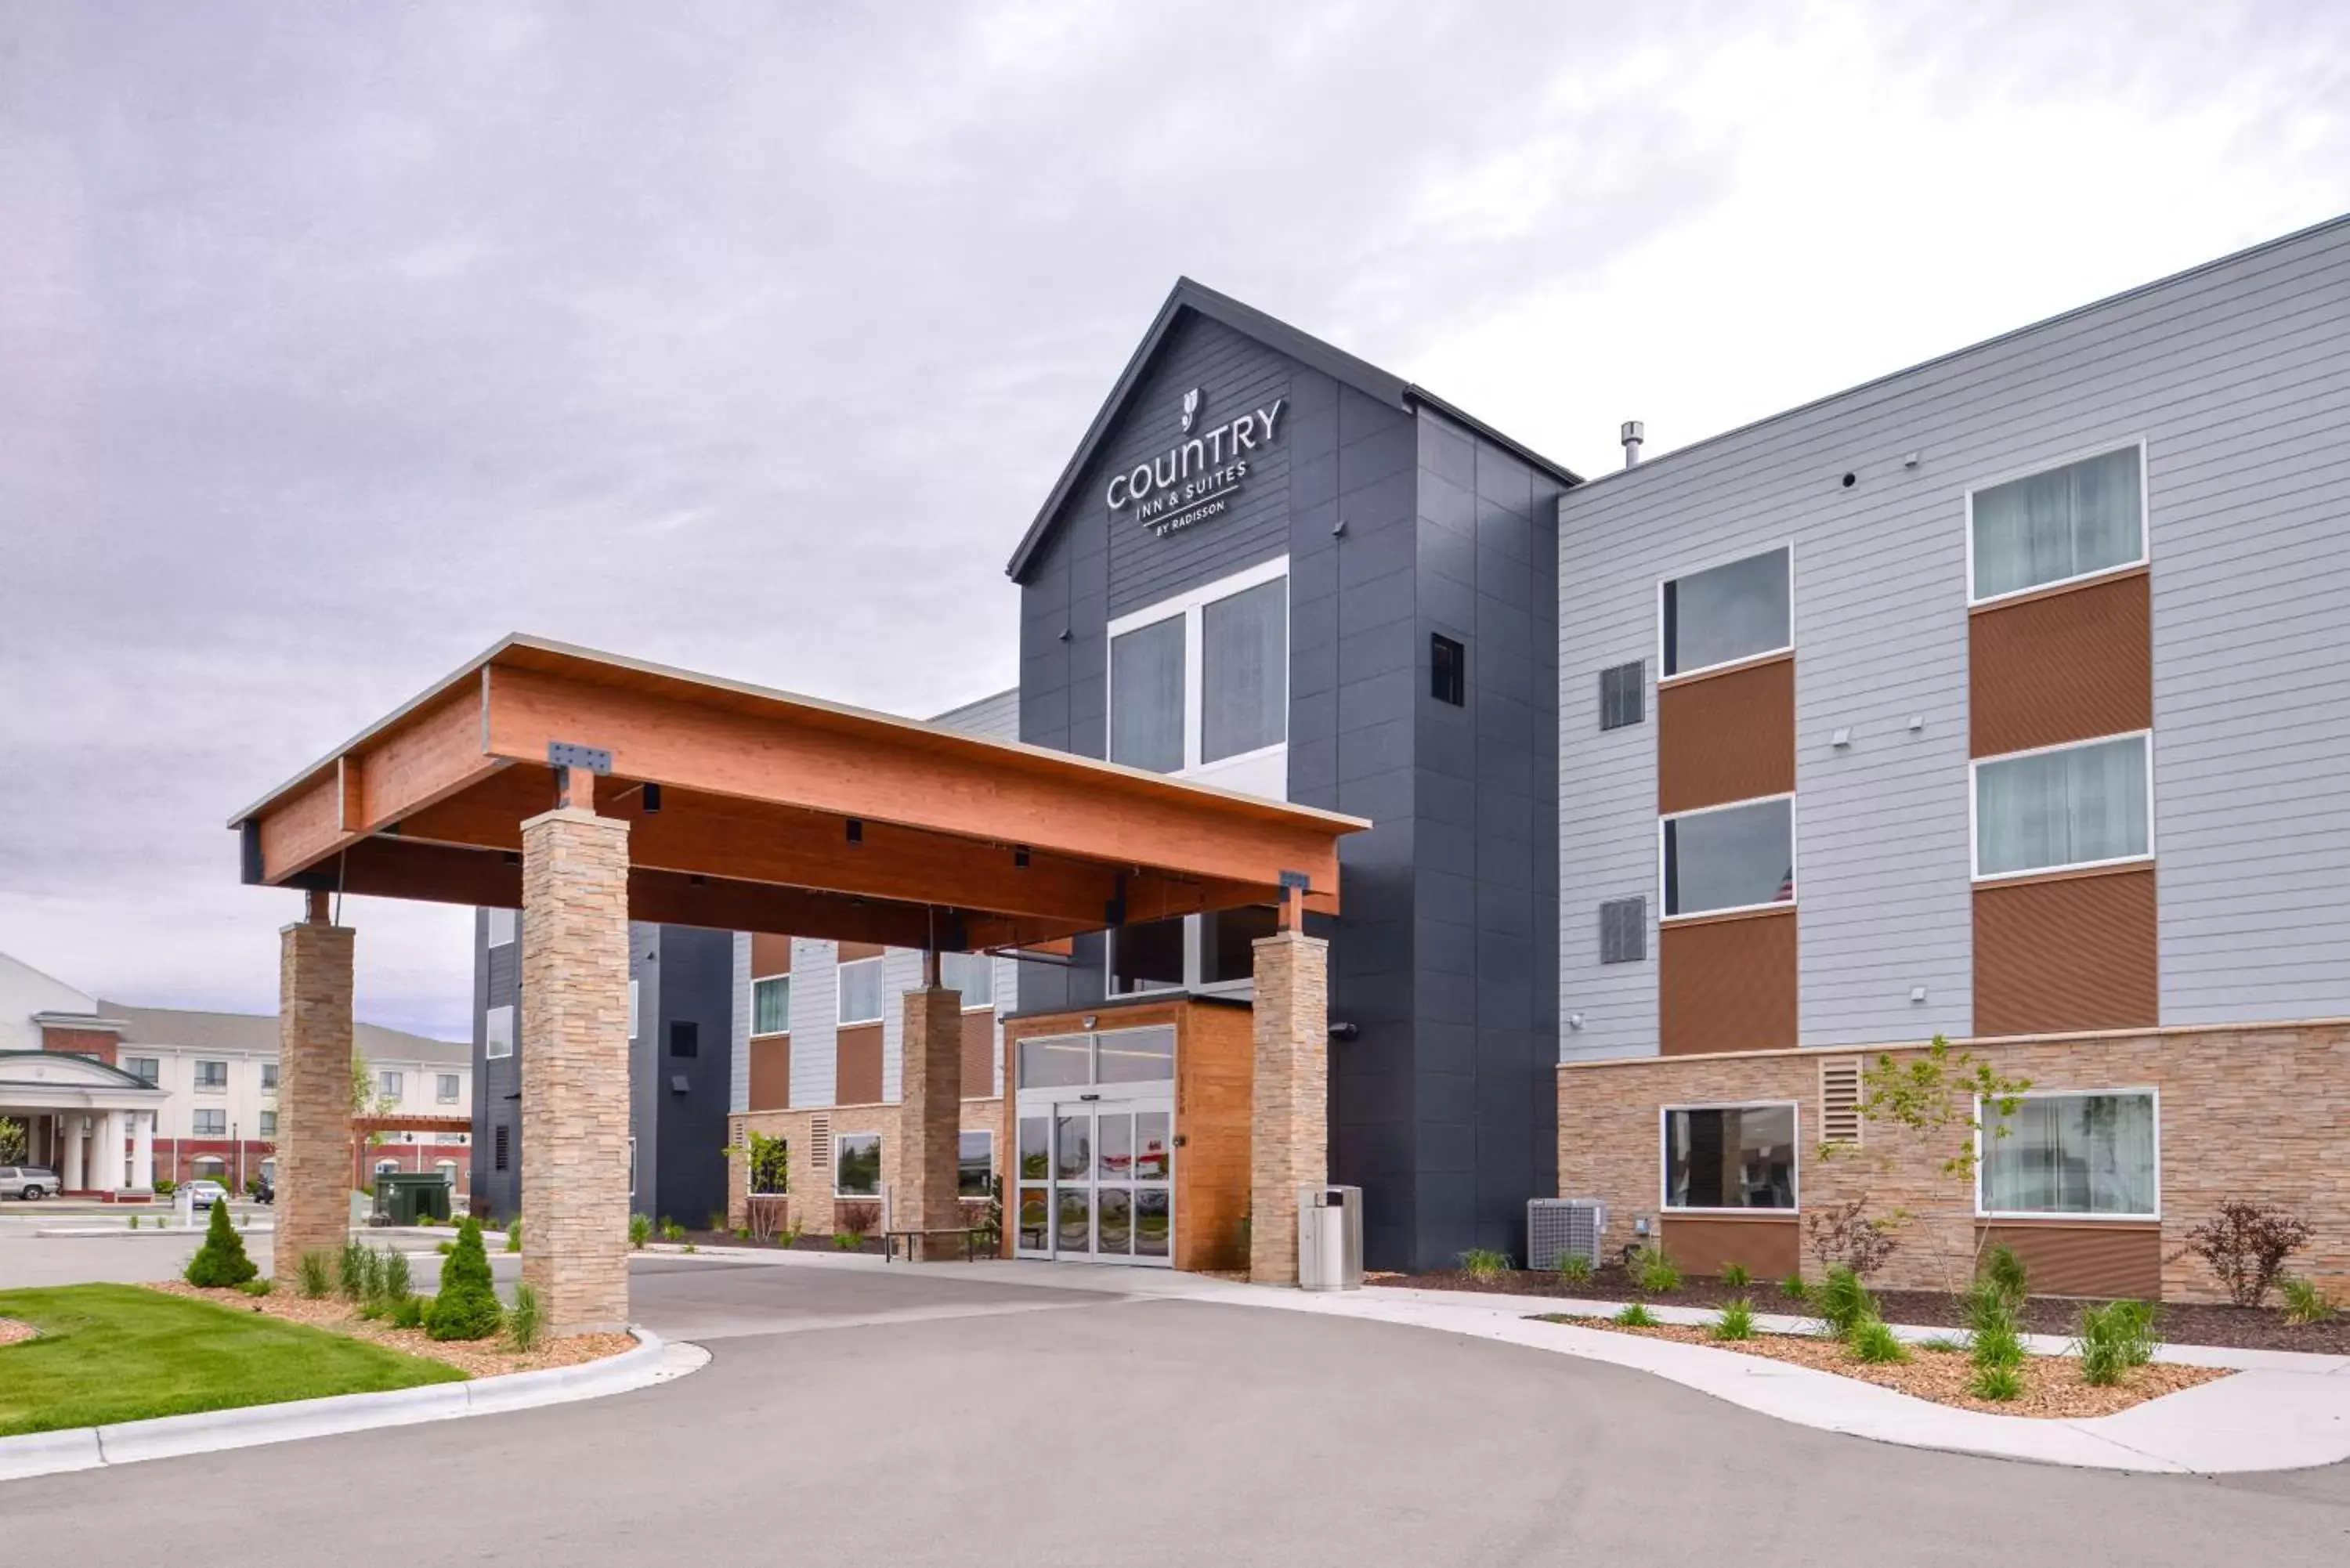 Property Building in Country Inn & Suites by Radisson, Ft. Atkinson, WI